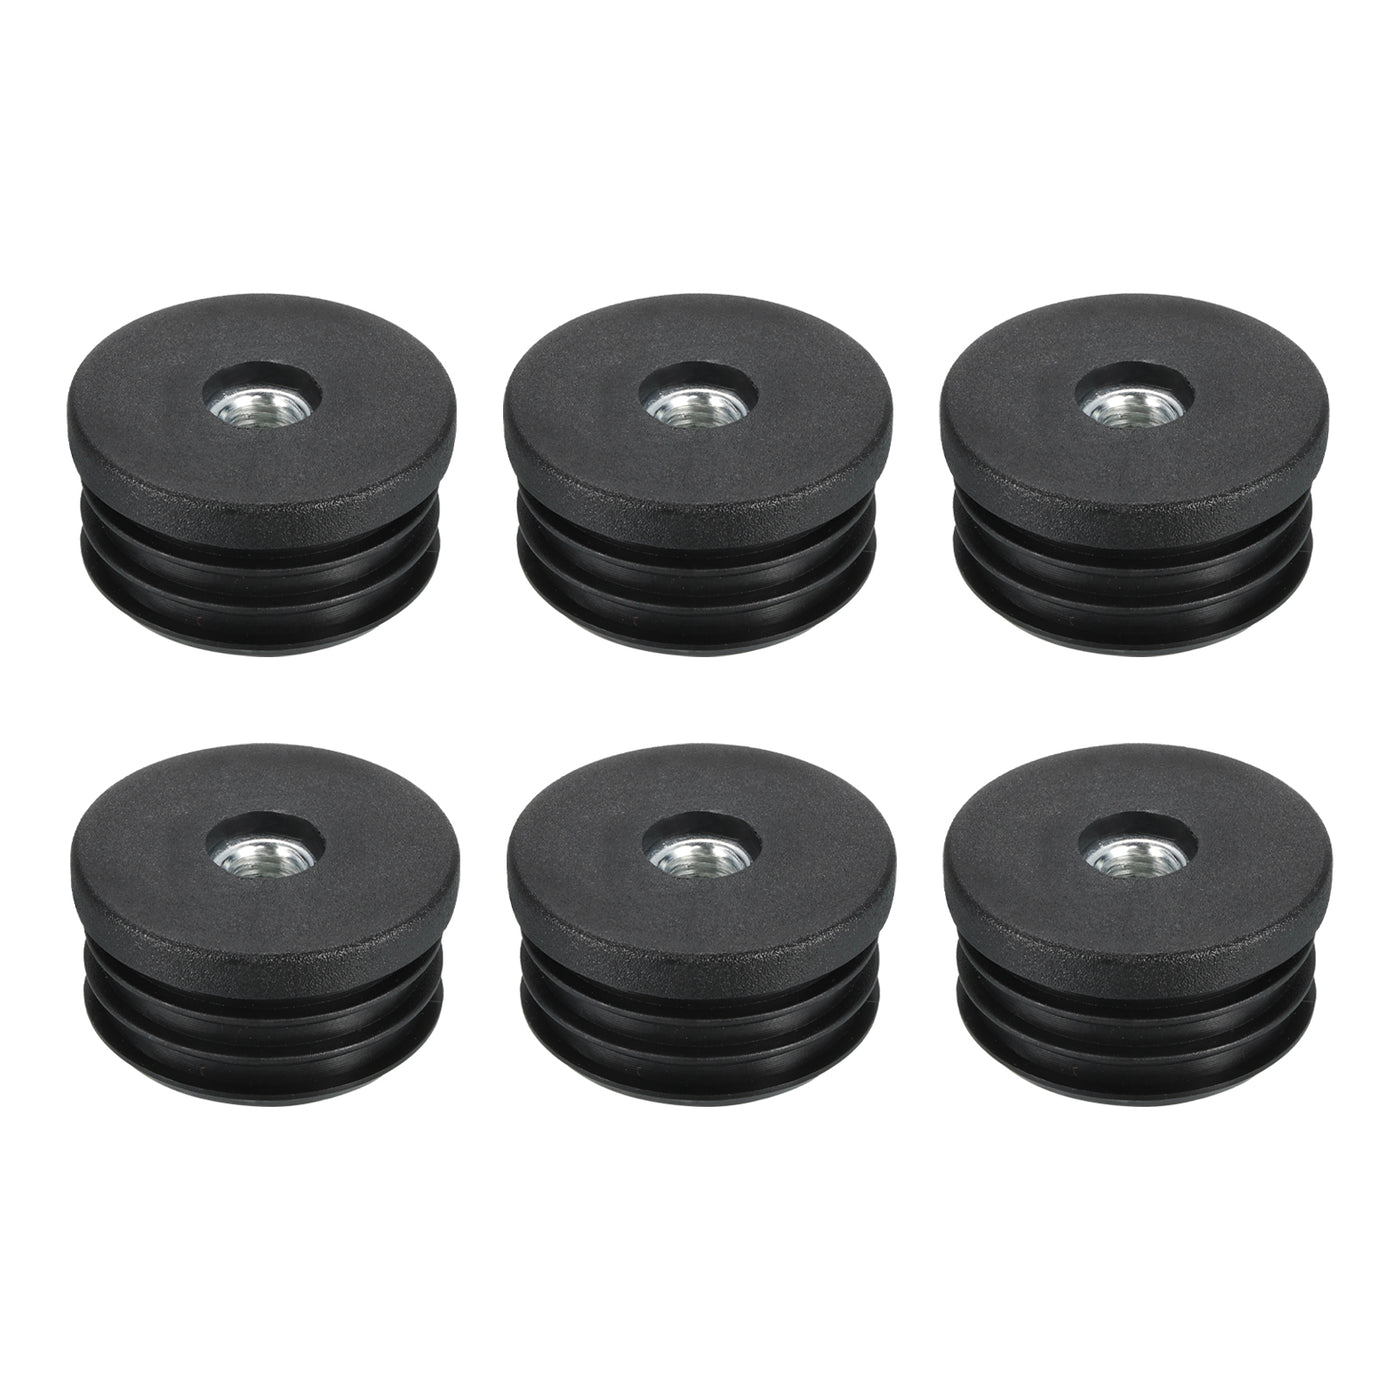 uxcell Uxcell 6Pcs Caster Insert with Thread, 38mm/1.5" M8 Thread for Furniture